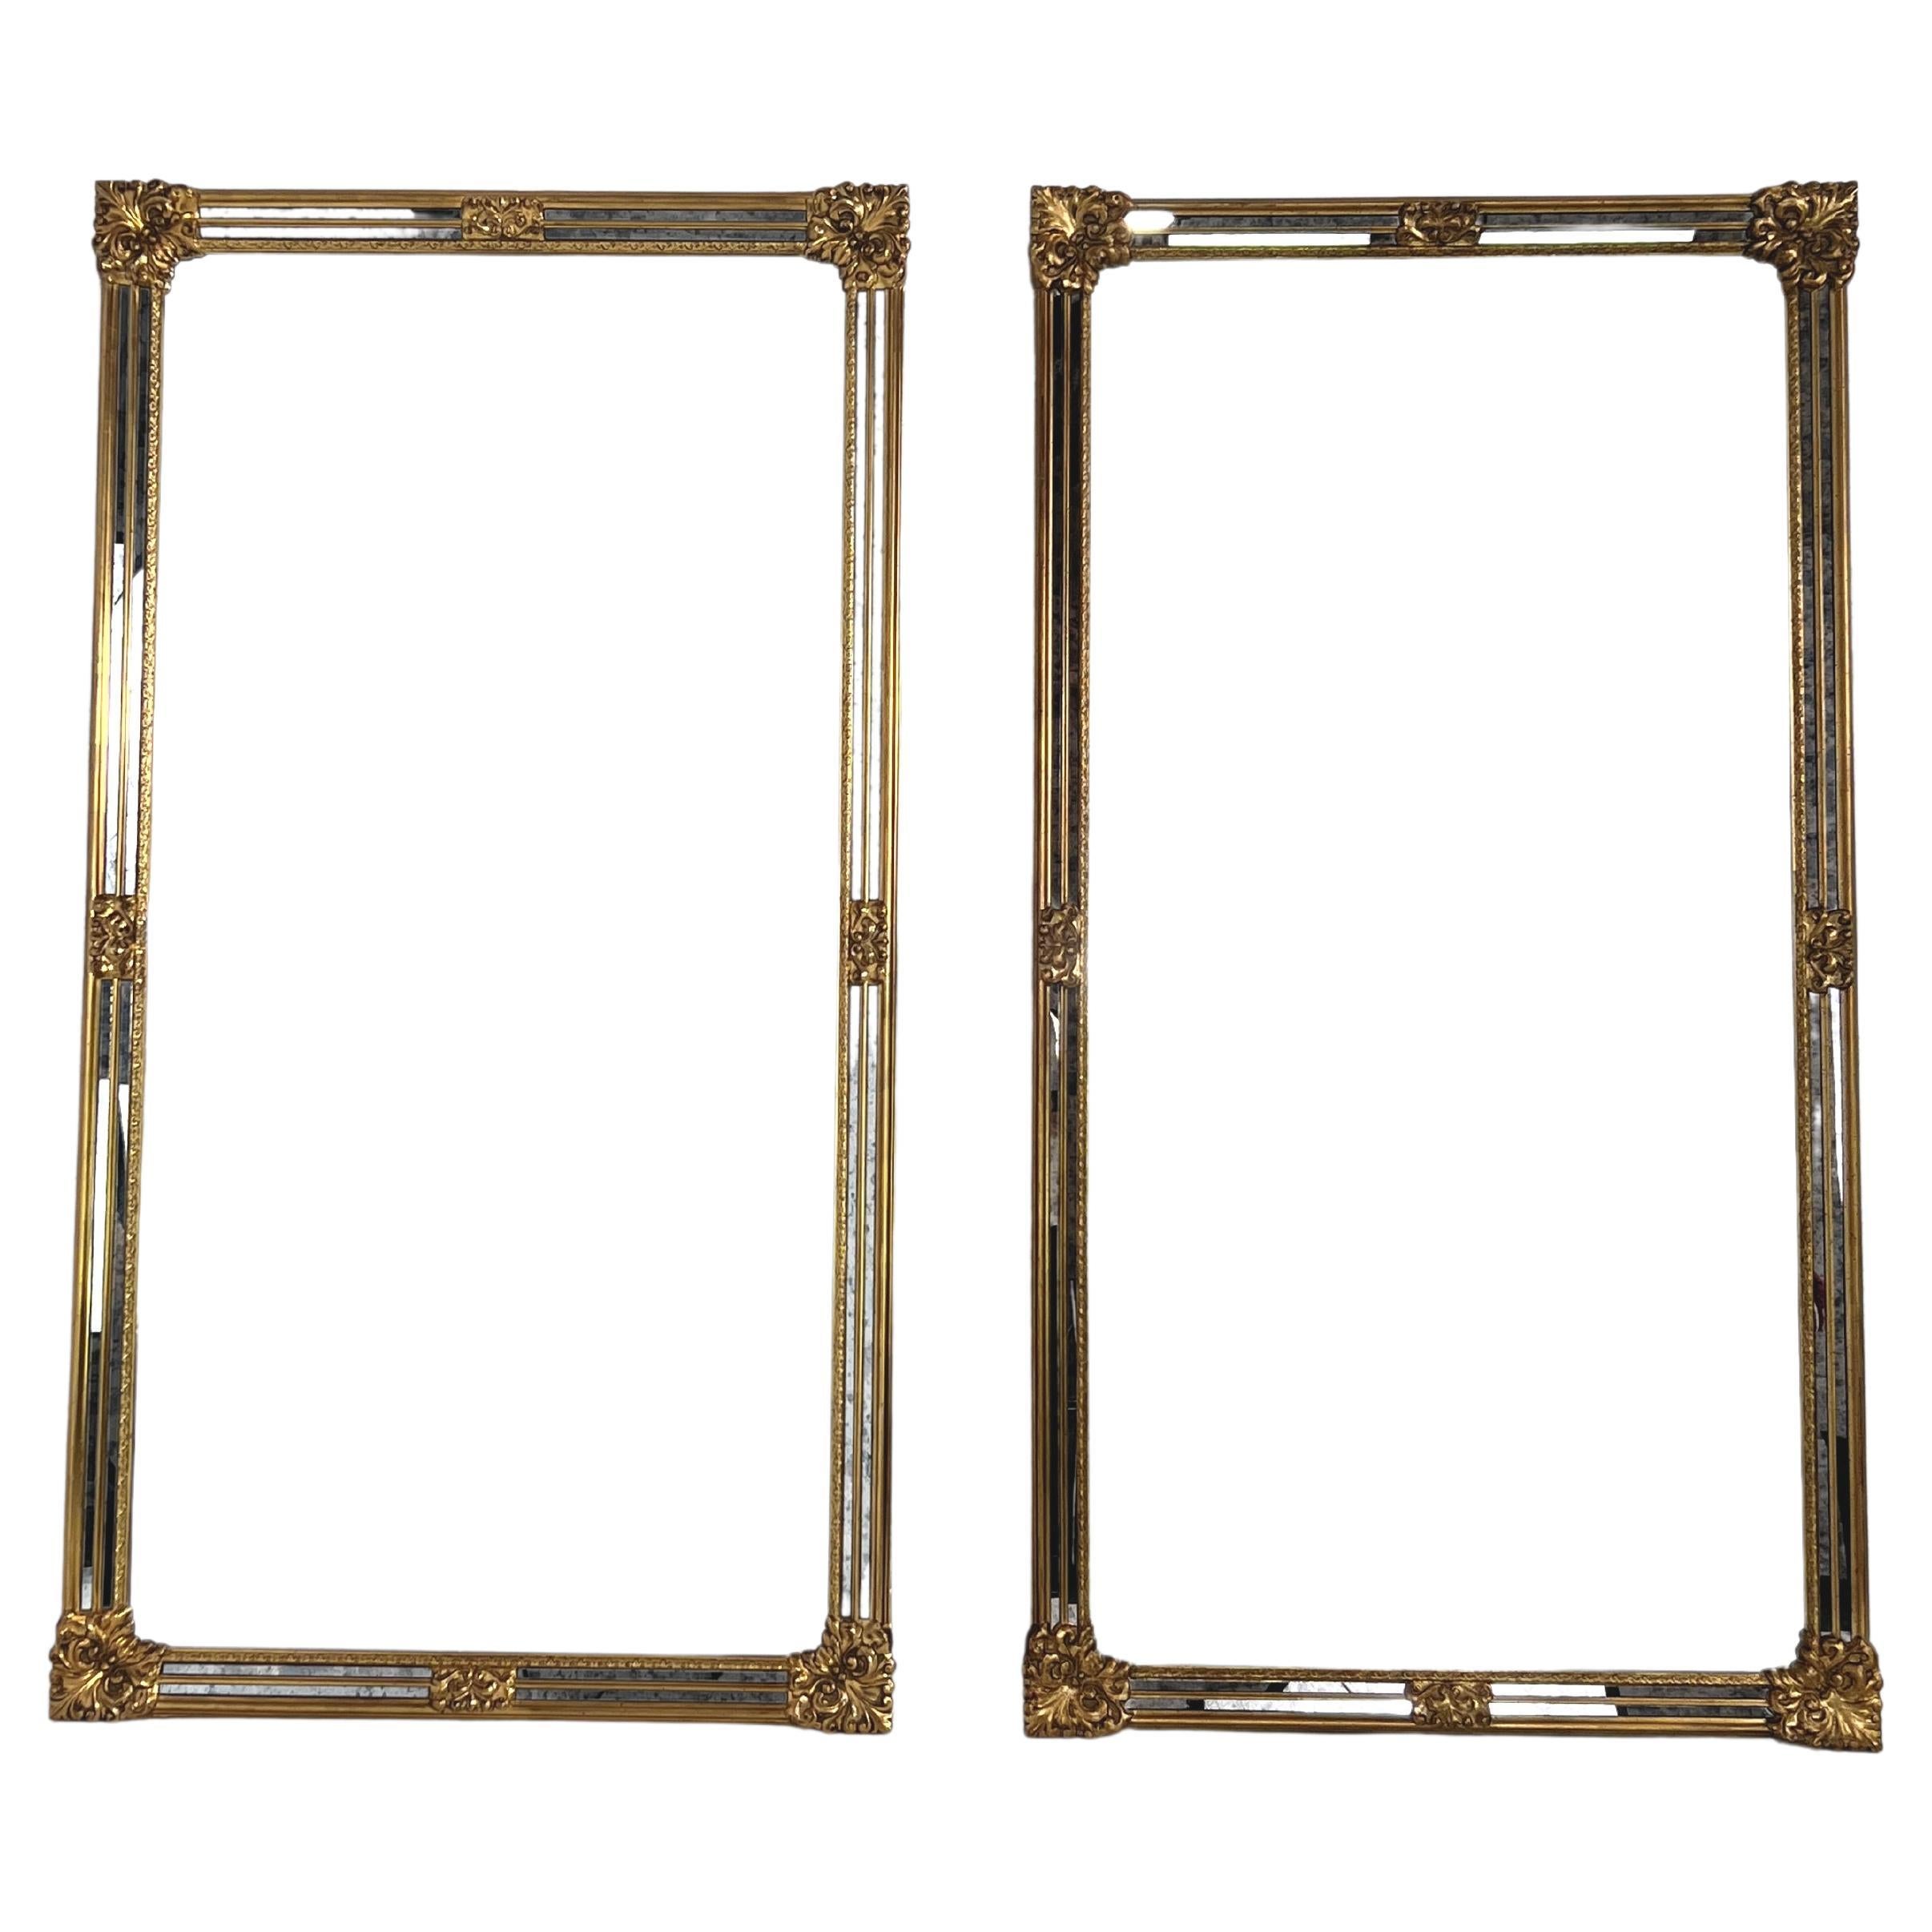 Pair of large mirrors with high-quality craftmanship. It imposes by their size but also by the quality of manufacture. The built-in fasteners are designed so that you can hang them in portrait or landscape. In perfect condition.